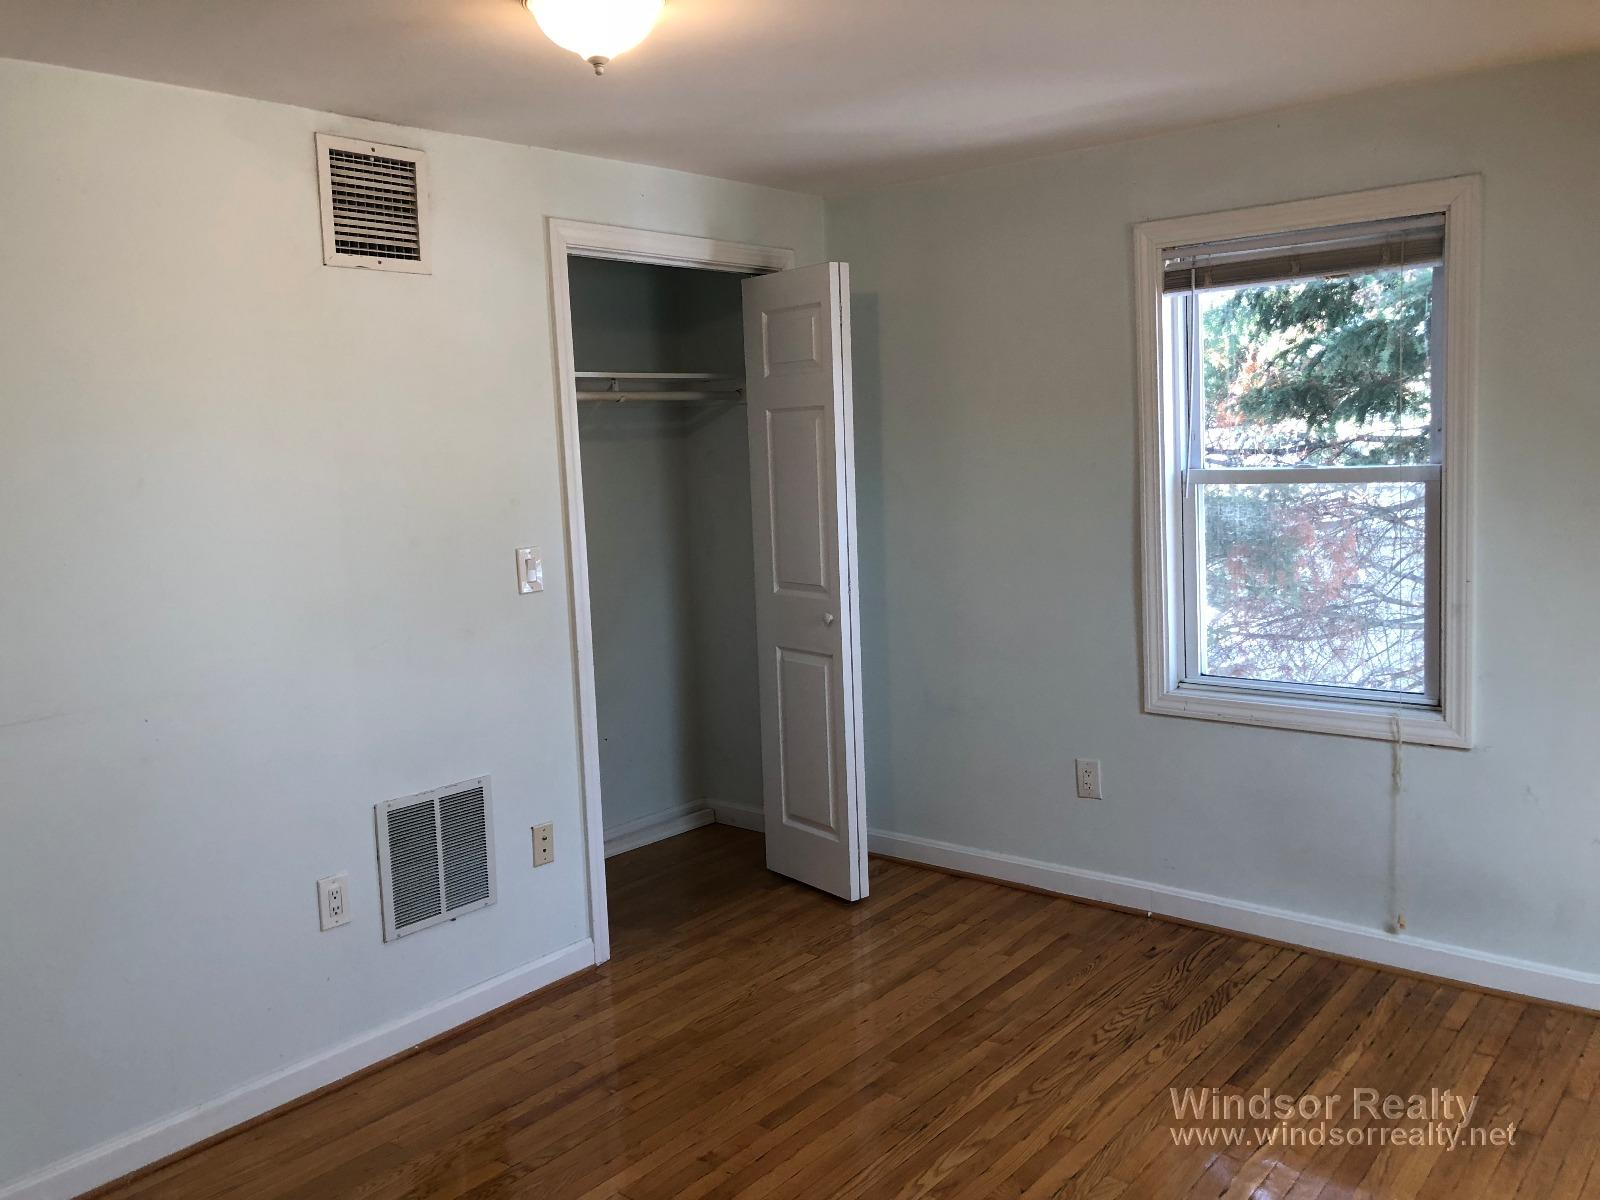 Photos of apartment on Clyde St.,Somerville MA 02145